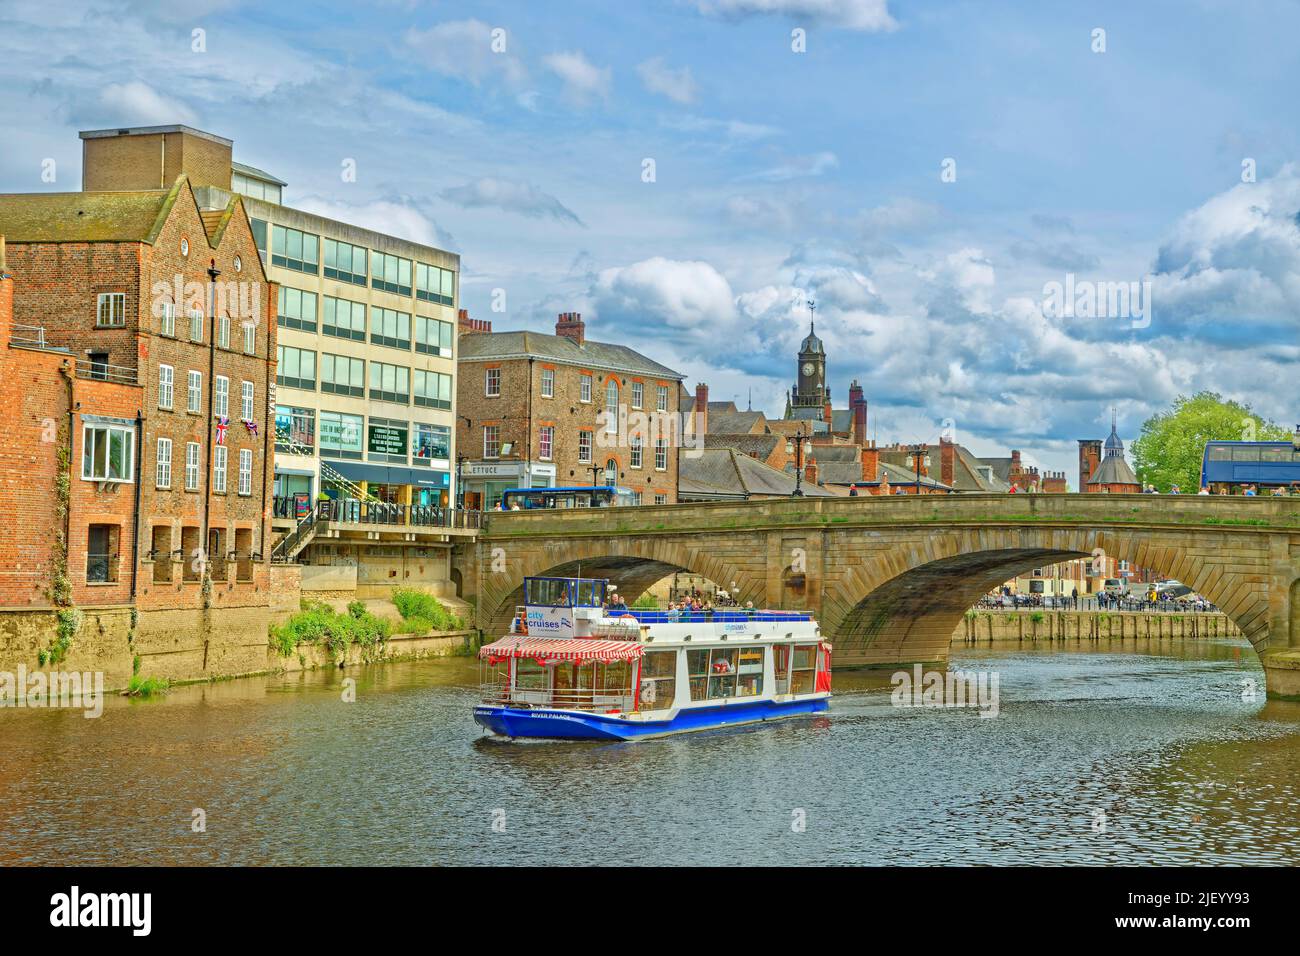 The River Ouse in York, Yorkshire, England. Stockfoto